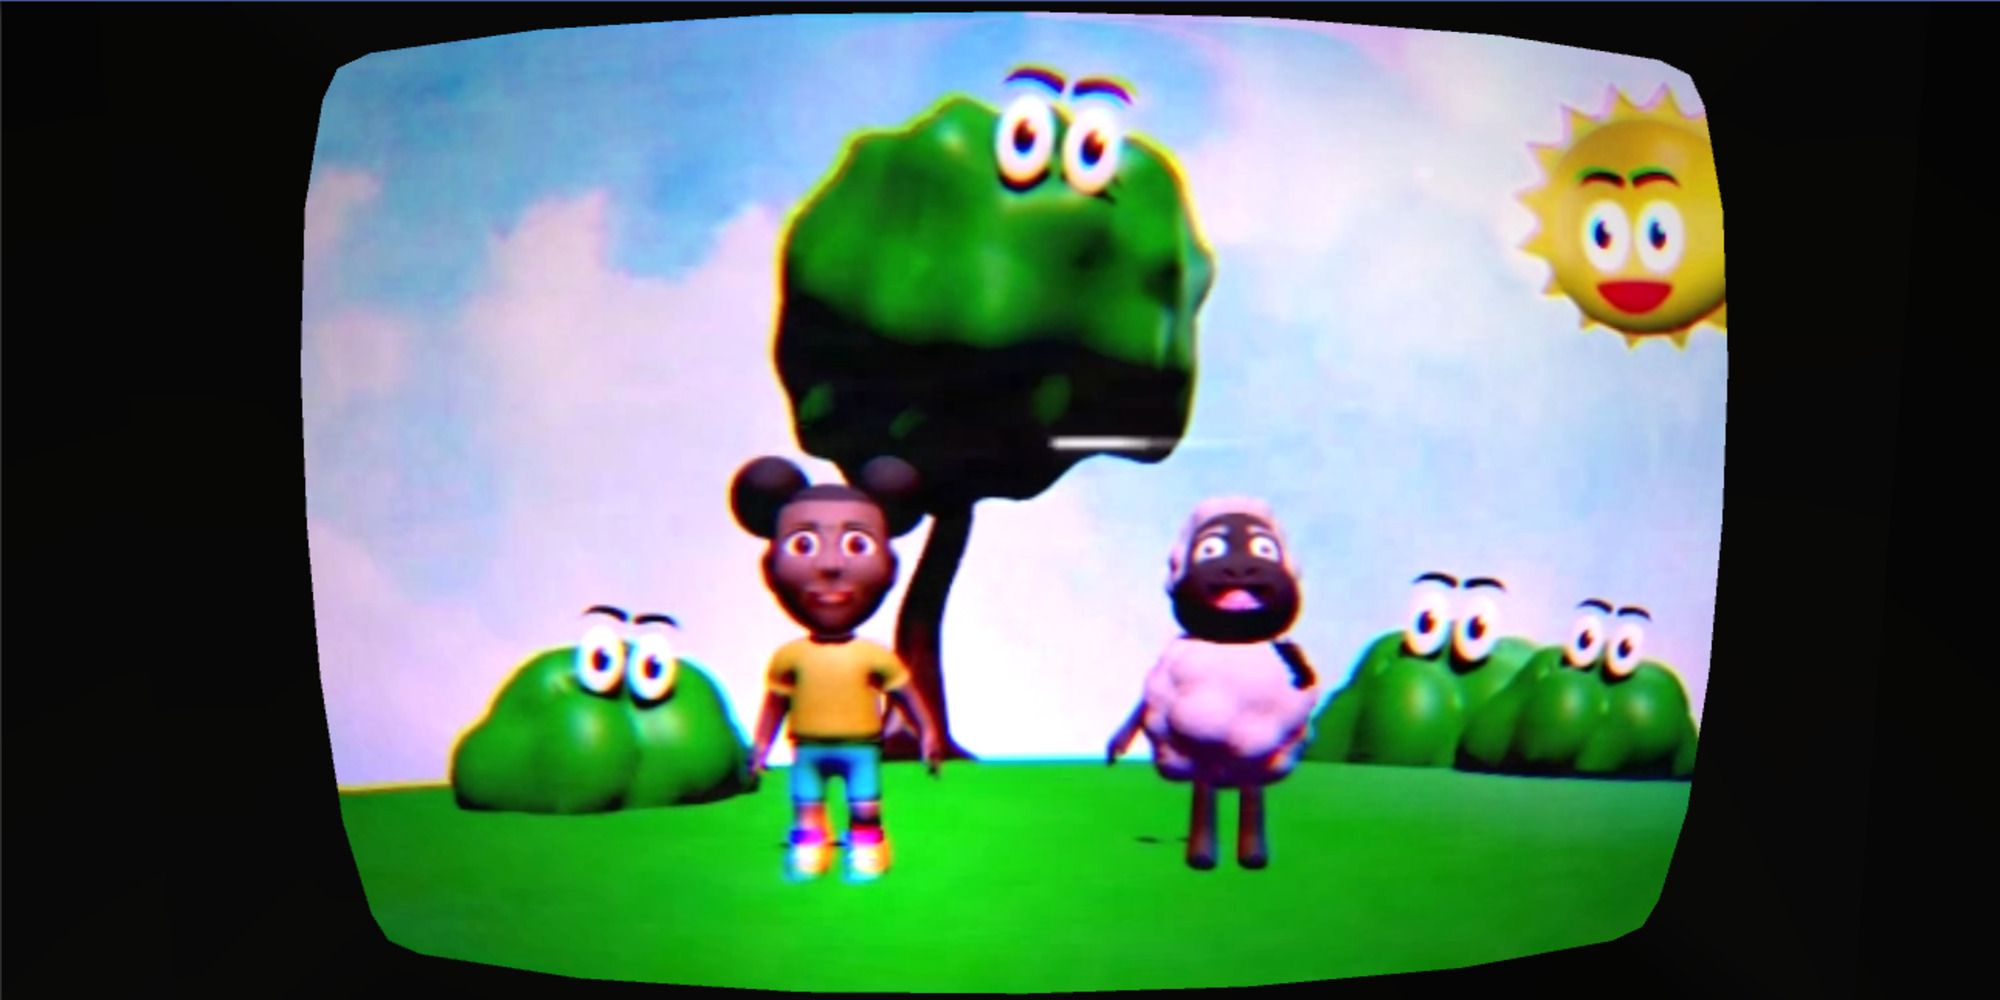 Amanda and Wooly standing in a field with bushes, a tree, and the sun having googly eyes